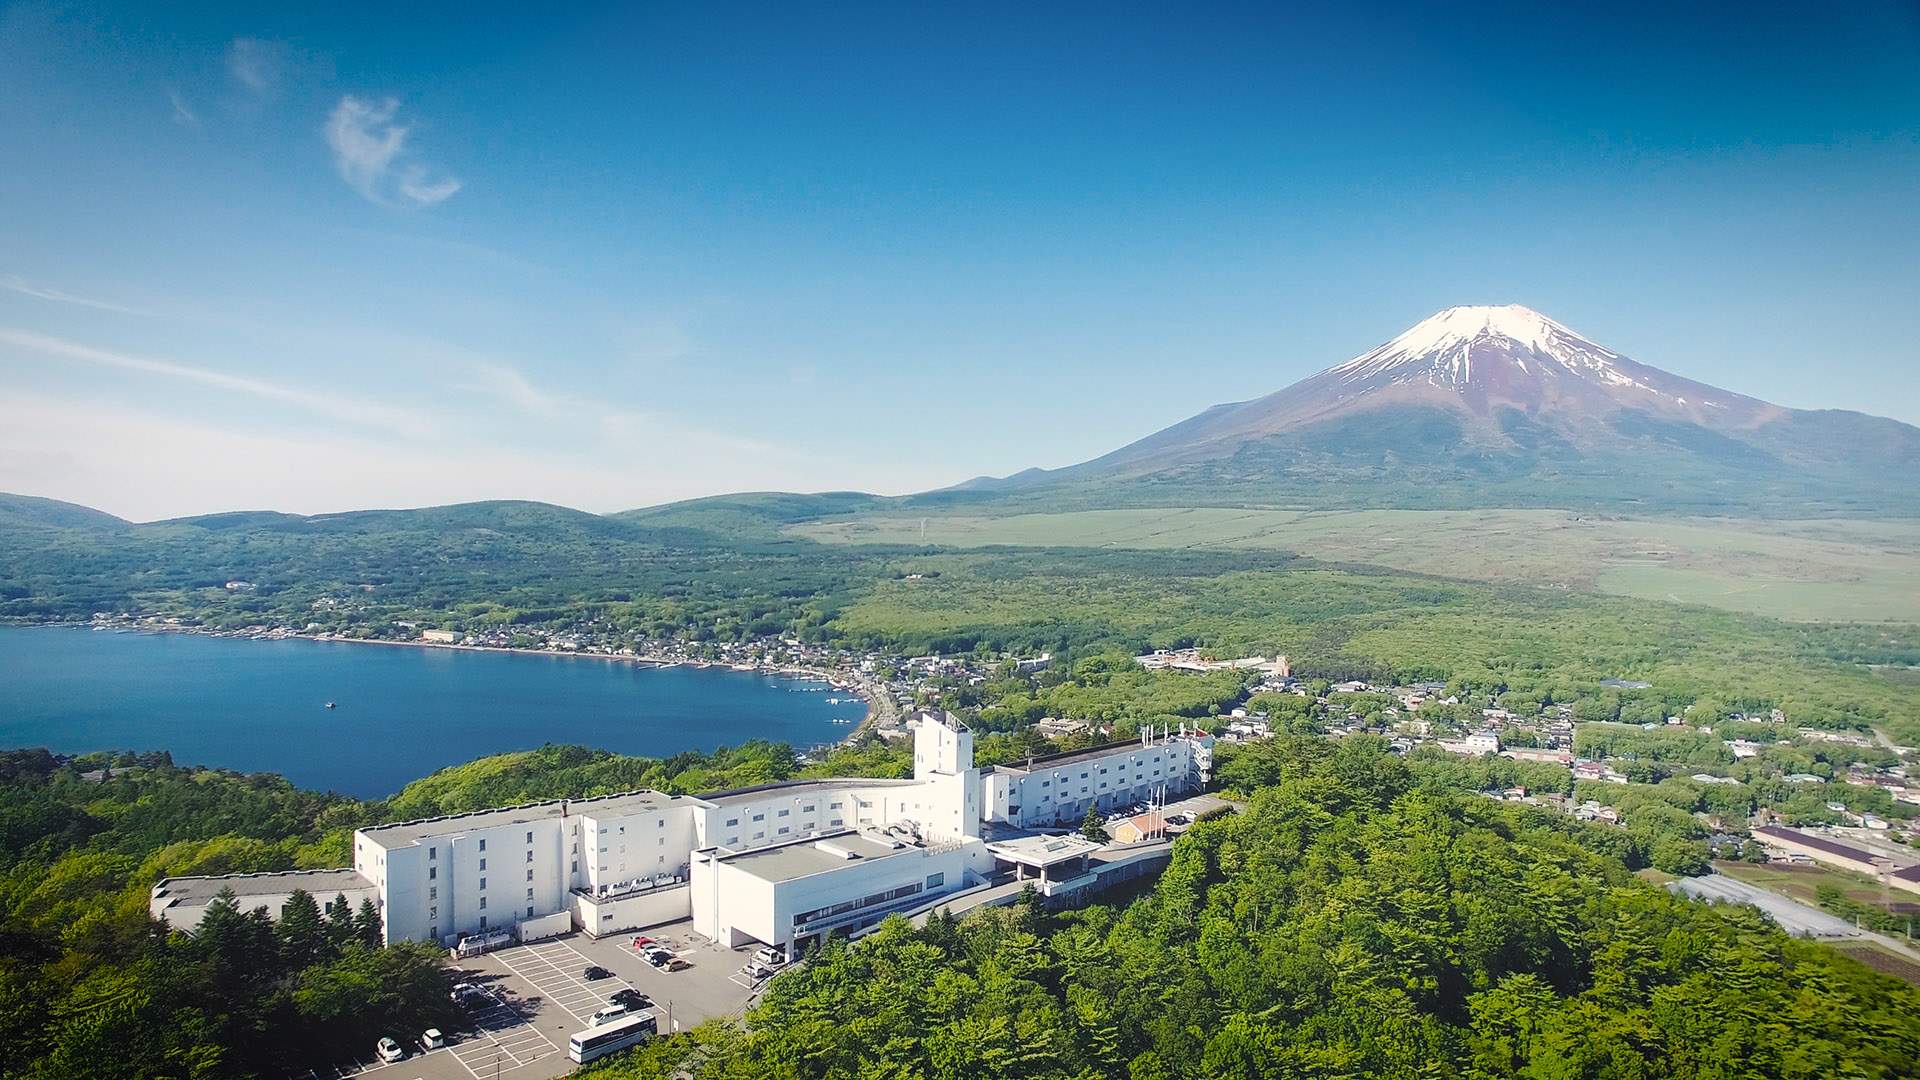 This Japanese Hotel Will Let You Return for Free If You Can't See Mount Fuji